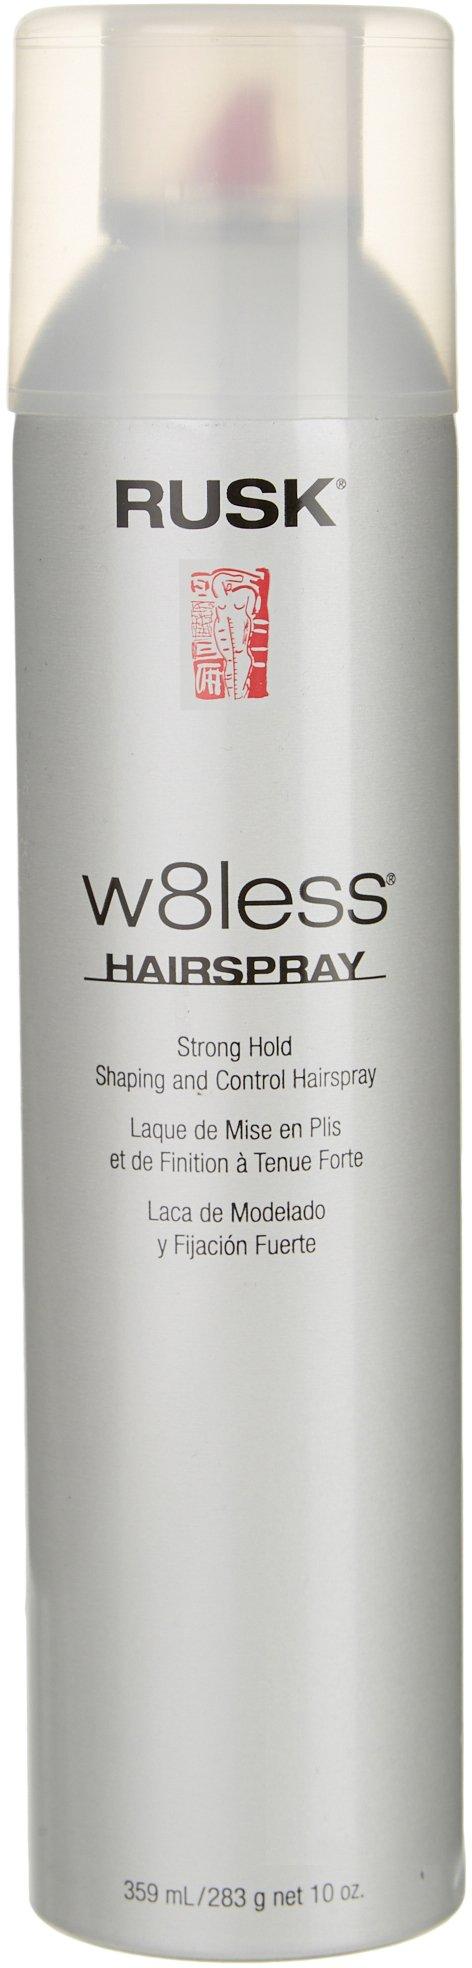 W8less Strong Hold Hairspray 10 oz.